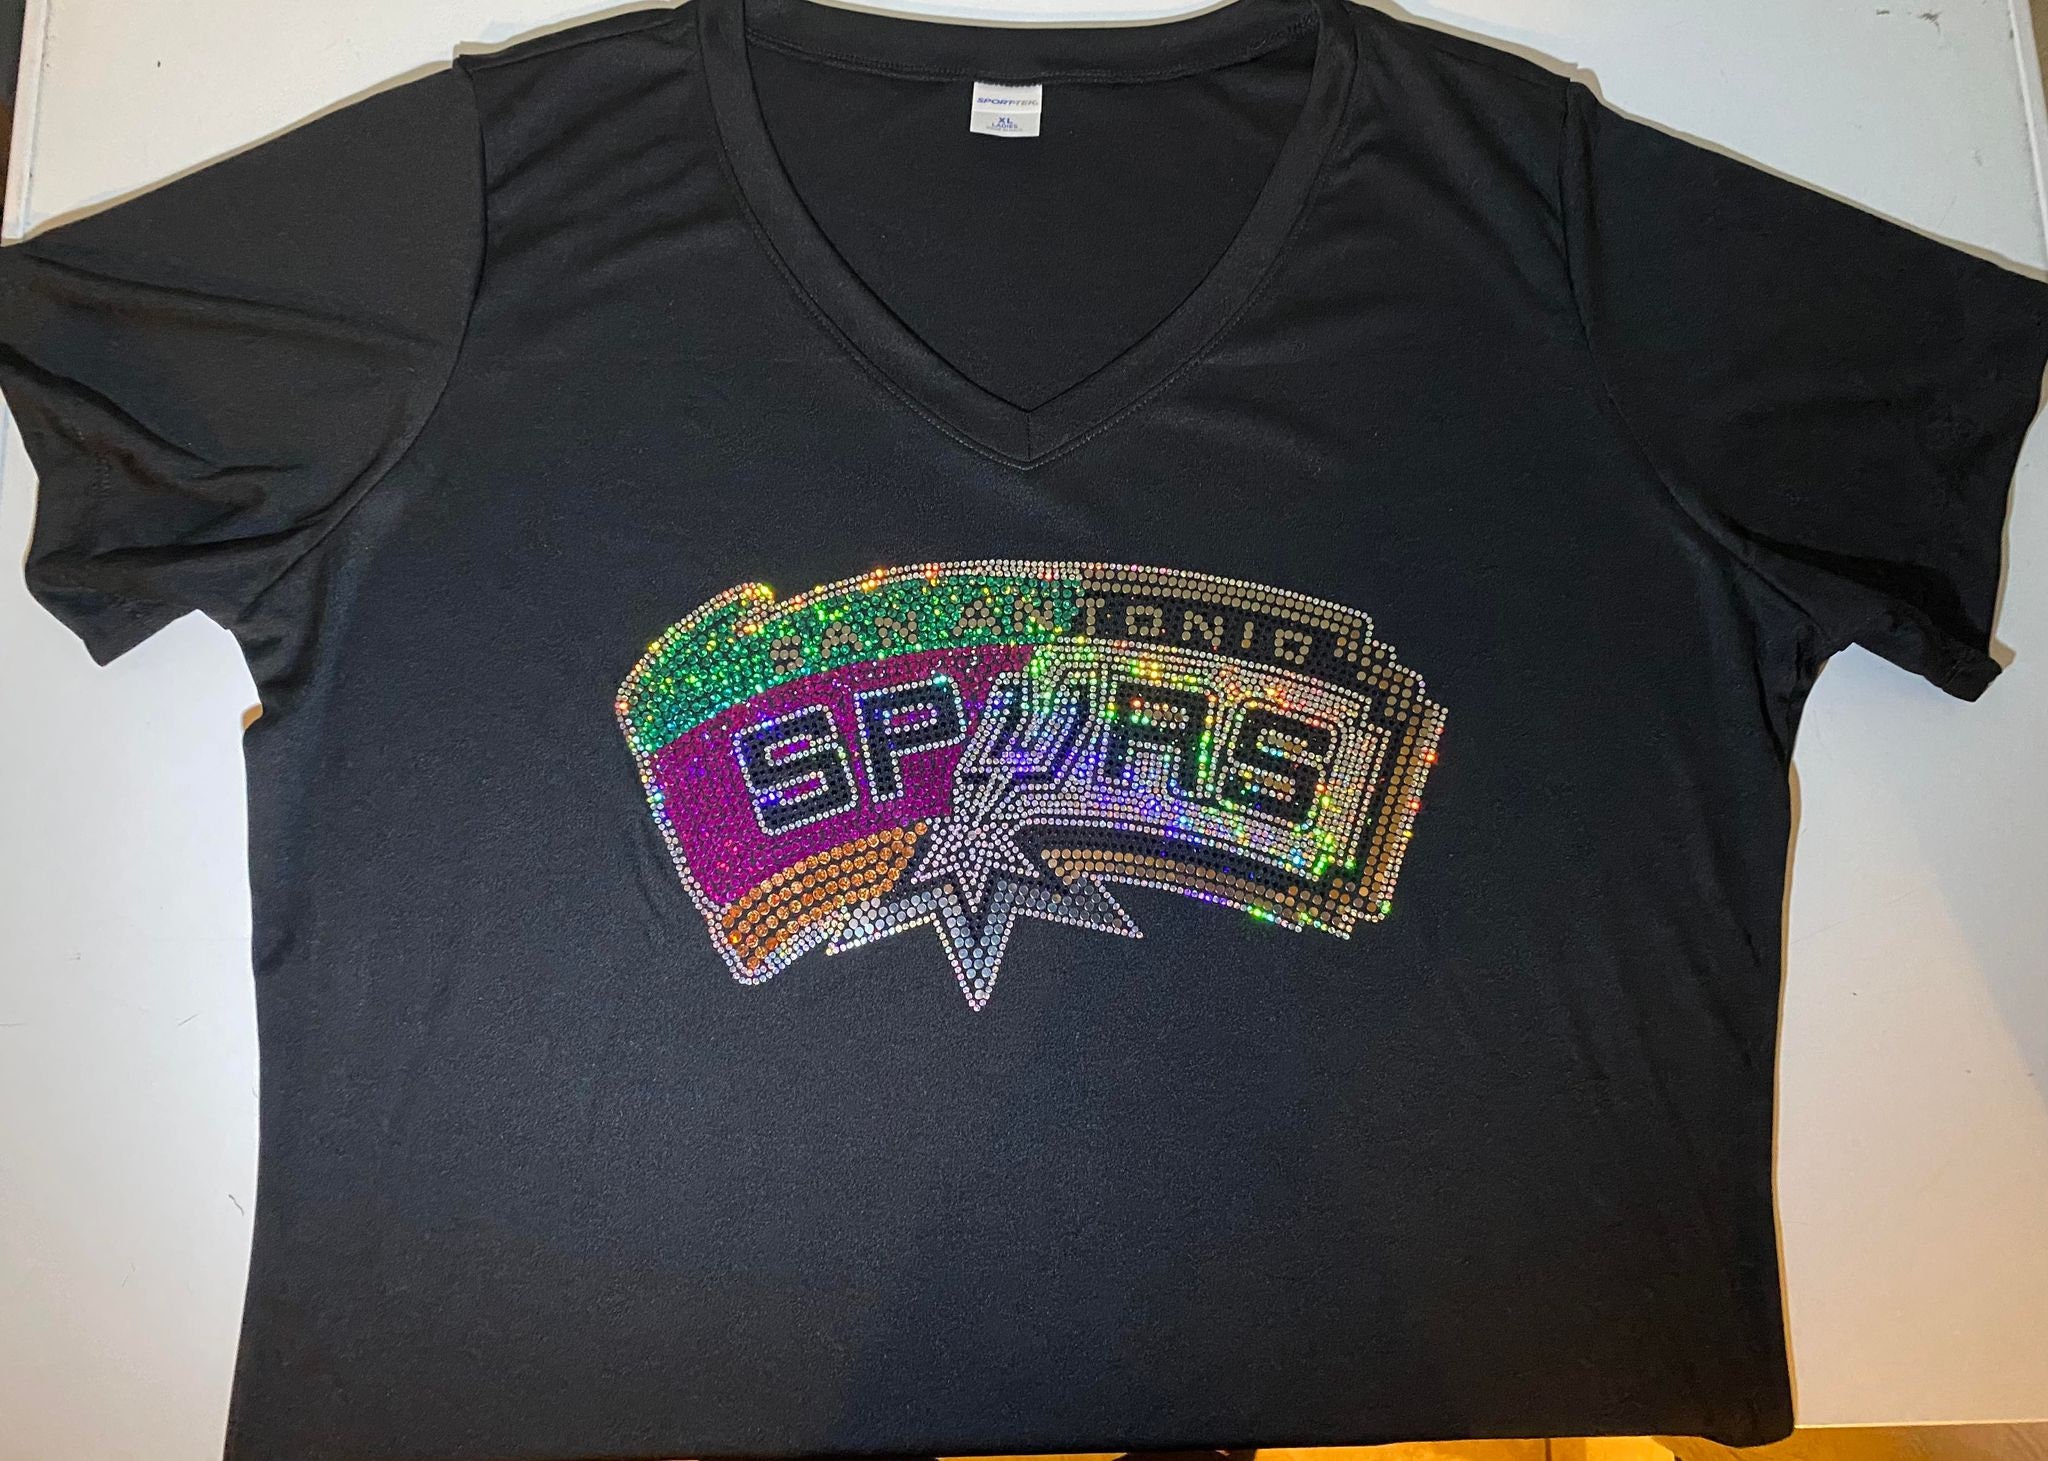 Spurs City Edition Fiesta shirts are available today - Pounding